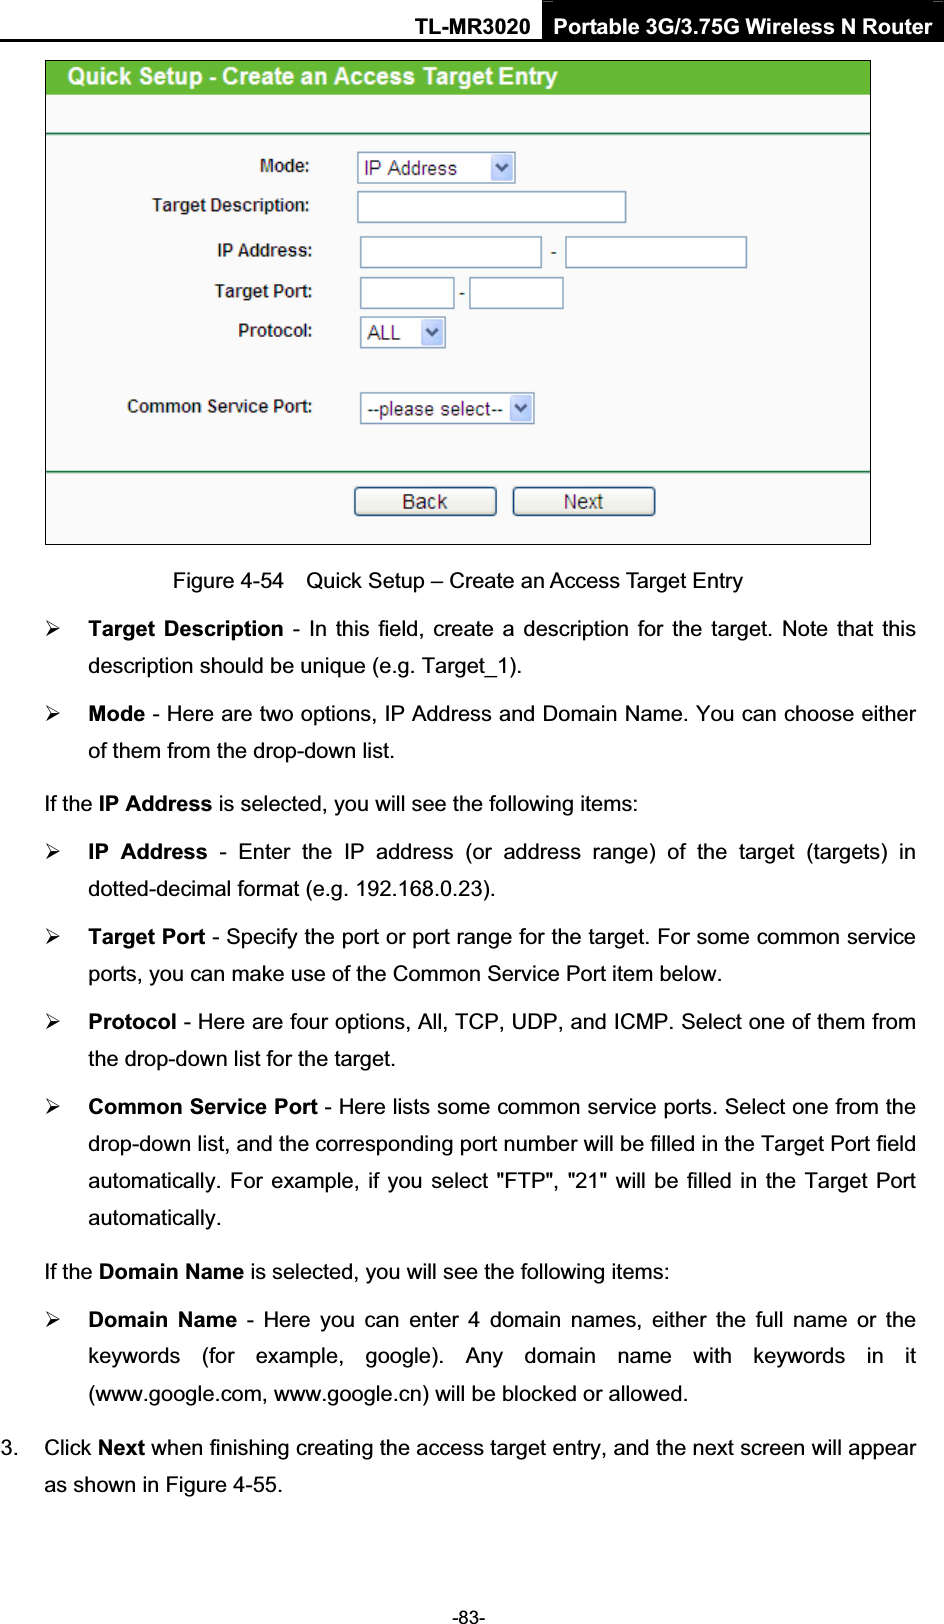 TL-MR3020 Portable 3G/3.75G Wireless N Router-83-Figure 4-54    Quick Setup – Create an Access Target Entry ¾Target  Description  -  In this field,  create a description  for  the  target.  Note that  this description should be unique (e.g. Target_1).   ¾Mode - Here are two options, IP Address and Domain Name. You can choose either of them from the drop-down list.   If the IP Address is selected, you will see the following items: ¾IP  Address  -  Enter  the  IP  address  (or  address  range)  of  the  target  (targets)  in dotted-decimal format (e.g. 192.168.0.23).   ¾Target Port - Specify the port or port range for the target. For some common service ports, you can make use of the Common Service Port item below.   ¾Protocol - Here are four options, All, TCP, UDP, and ICMP. Select one of them from the drop-down list for the target.   ¾Common Service Port - Here lists some common service ports. Select one from the drop-down list, and the corresponding port number will be filled in the Target Port field automatically. For example, if you select &quot;FTP&quot;, &quot;21&quot; will be filled in the Target Port automatically.If the Domain Name is selected, you will see the following items: ¾Domain  Name  -  Here  you  can  enter  4  domain  names,  either  the  full  name  or  the keywords  (for  example,  google).  Any  domain  name  with  keywords  in  it (www.google.com, www.google.cn) will be blocked or allowed.   3.  Click Next when finishing creating the access target entry, and the next screen will appear as shown in Figure 4-55. 